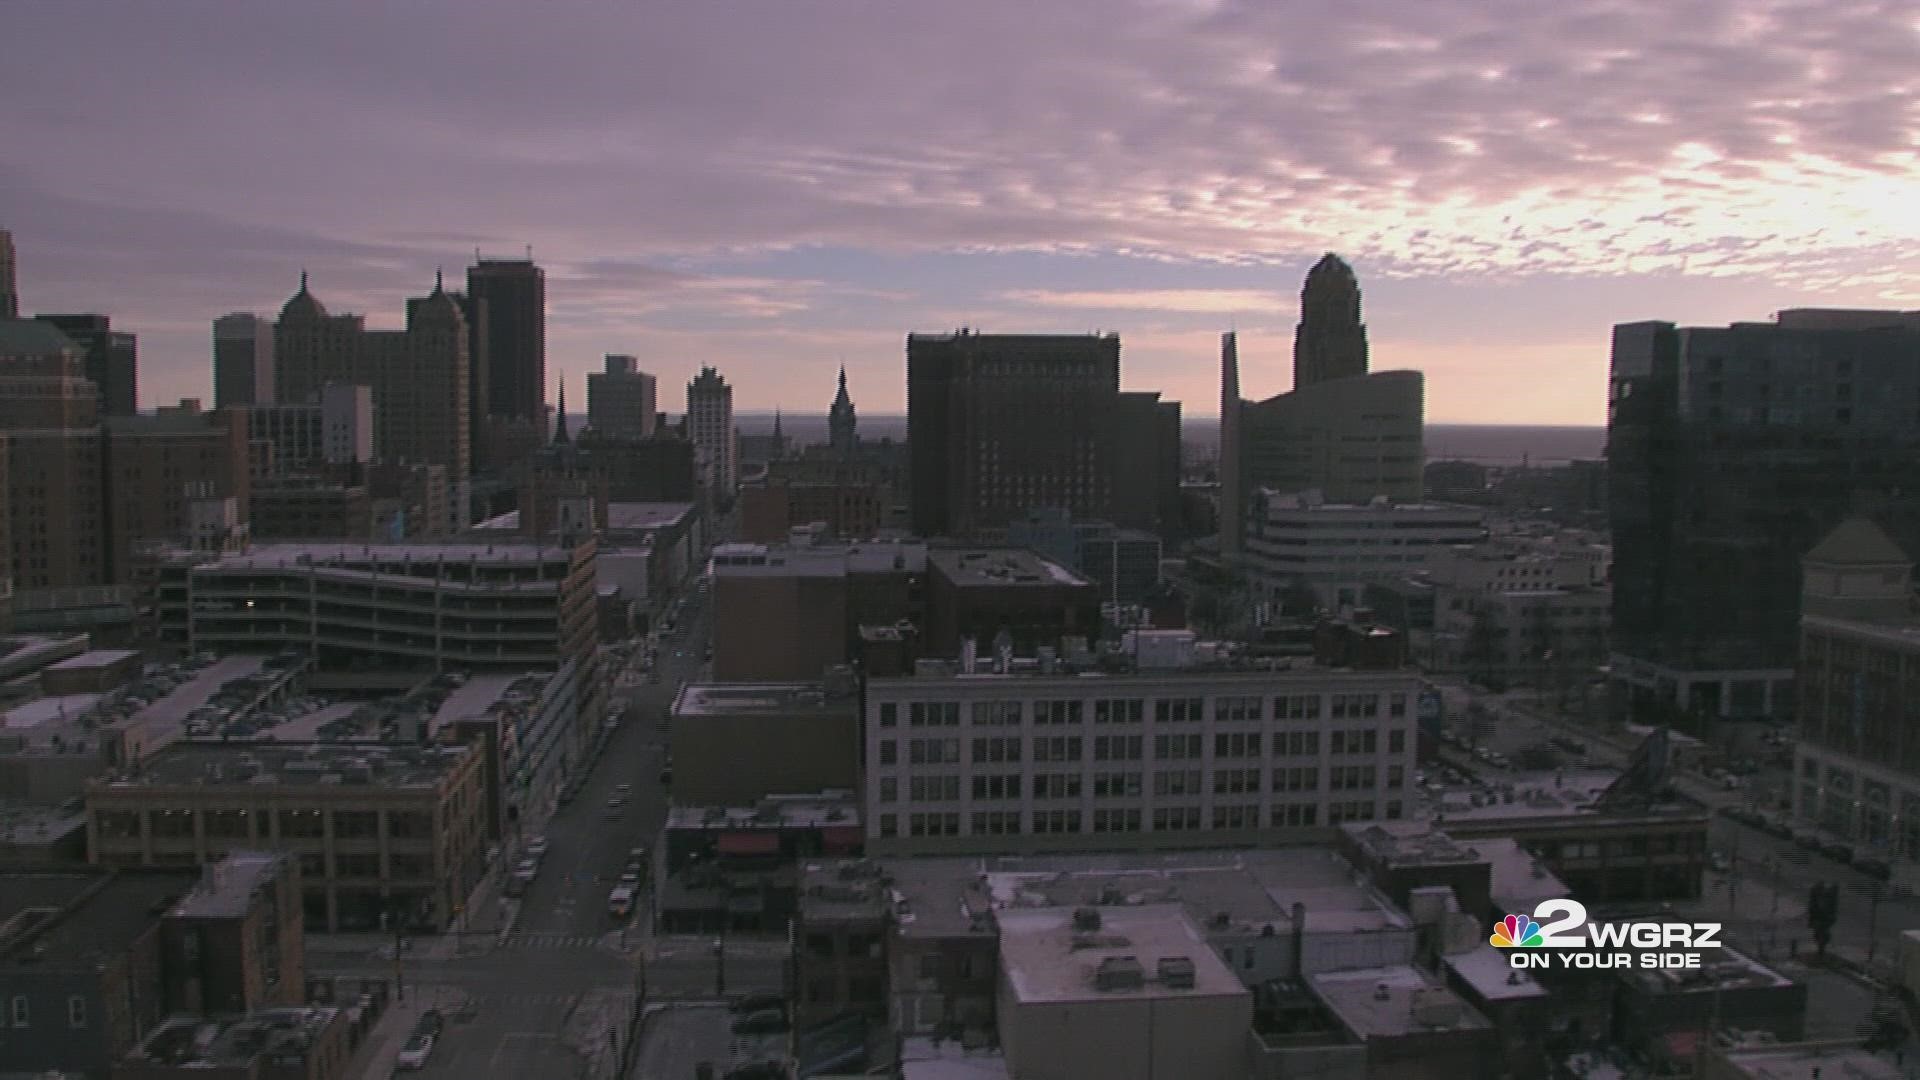 This sunset in downtown Buffalo on Thursday, Feb. 2 was captured in this time-lapse video that spanned roughly 90 minutes.